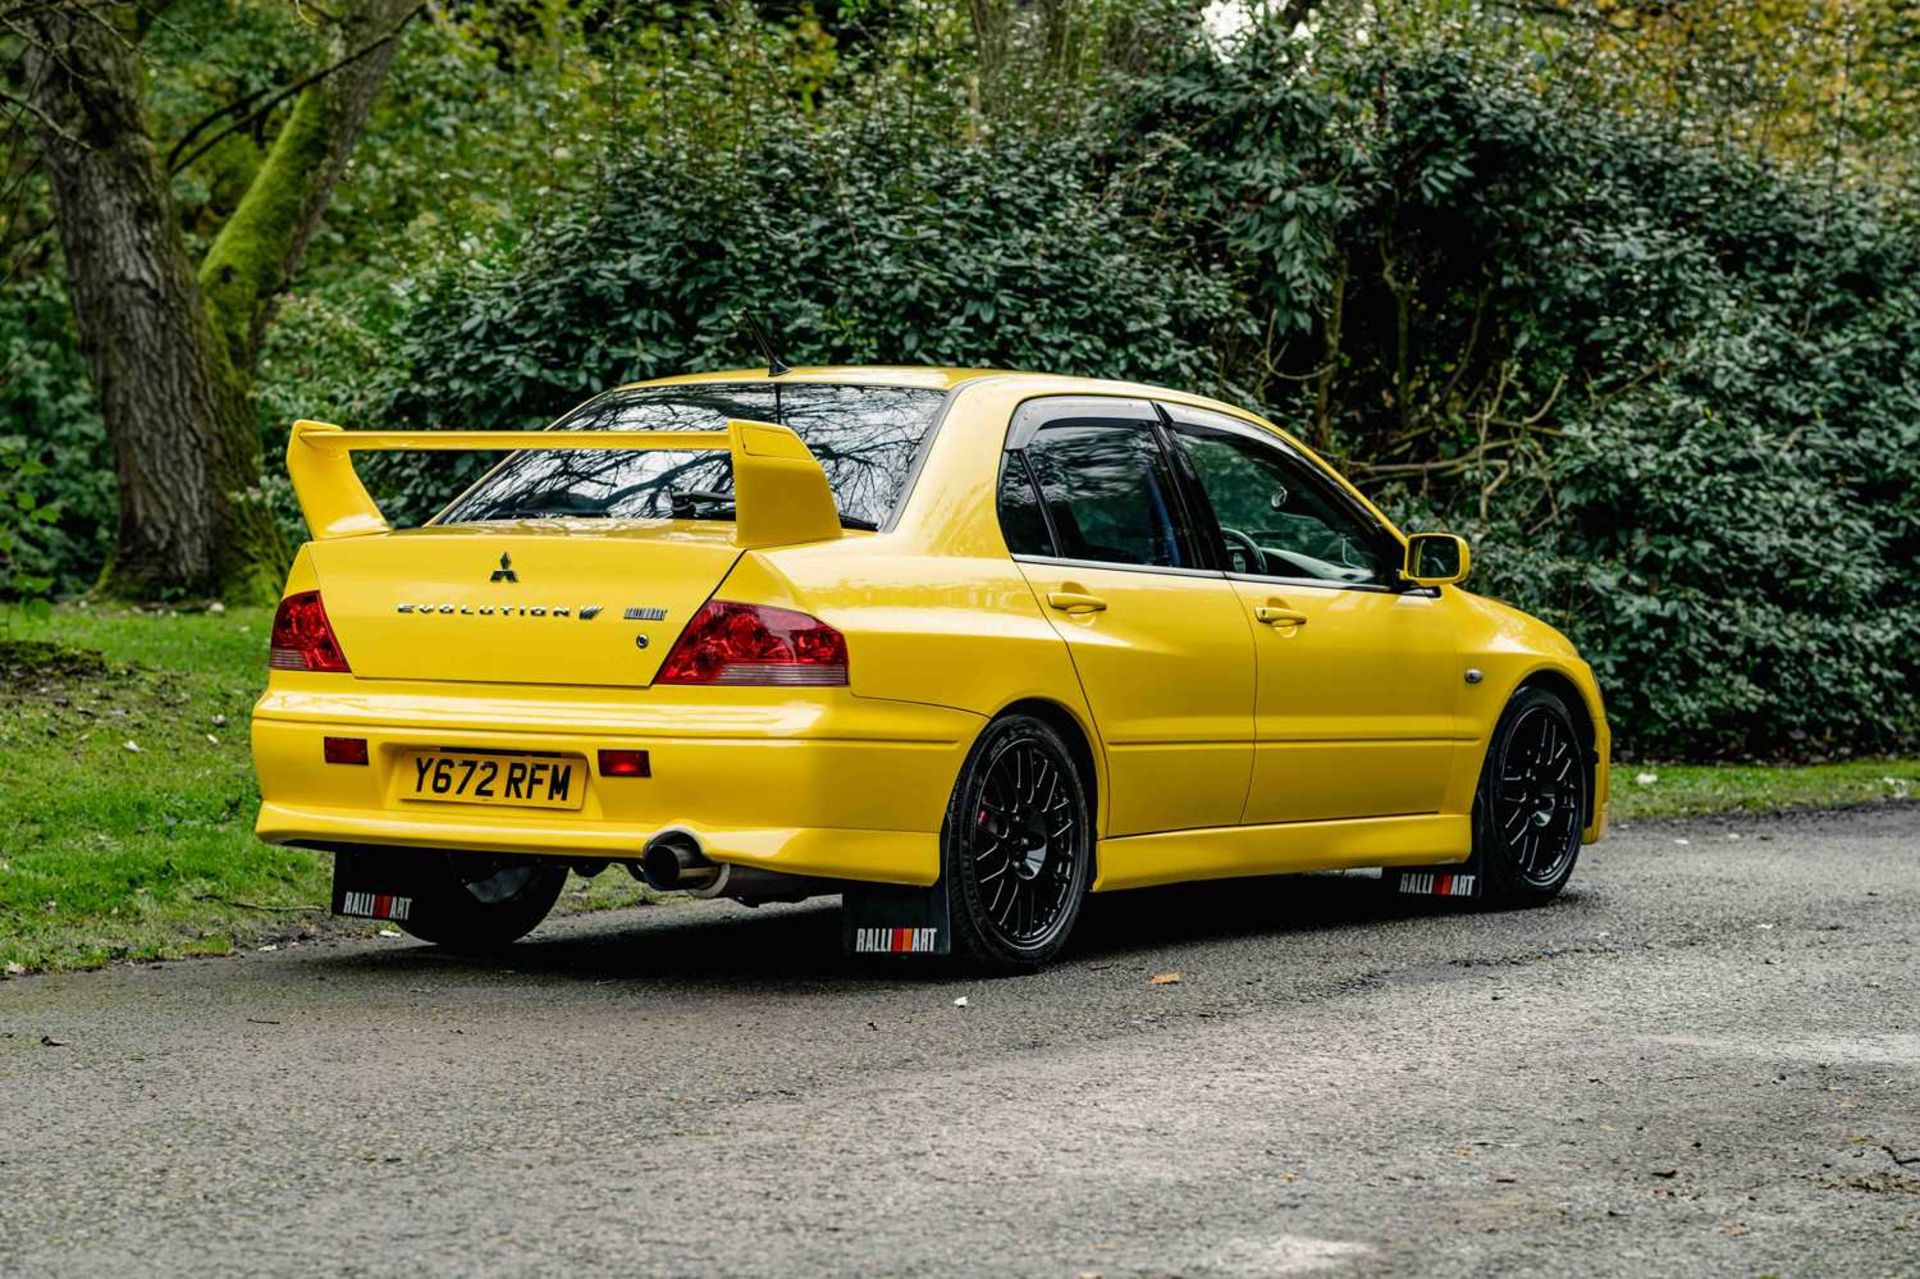 2001 Mitsubishi Lancer Evolution VII Subtly upgraded and previous long-term (seventeen year) ownersh - Image 13 of 64